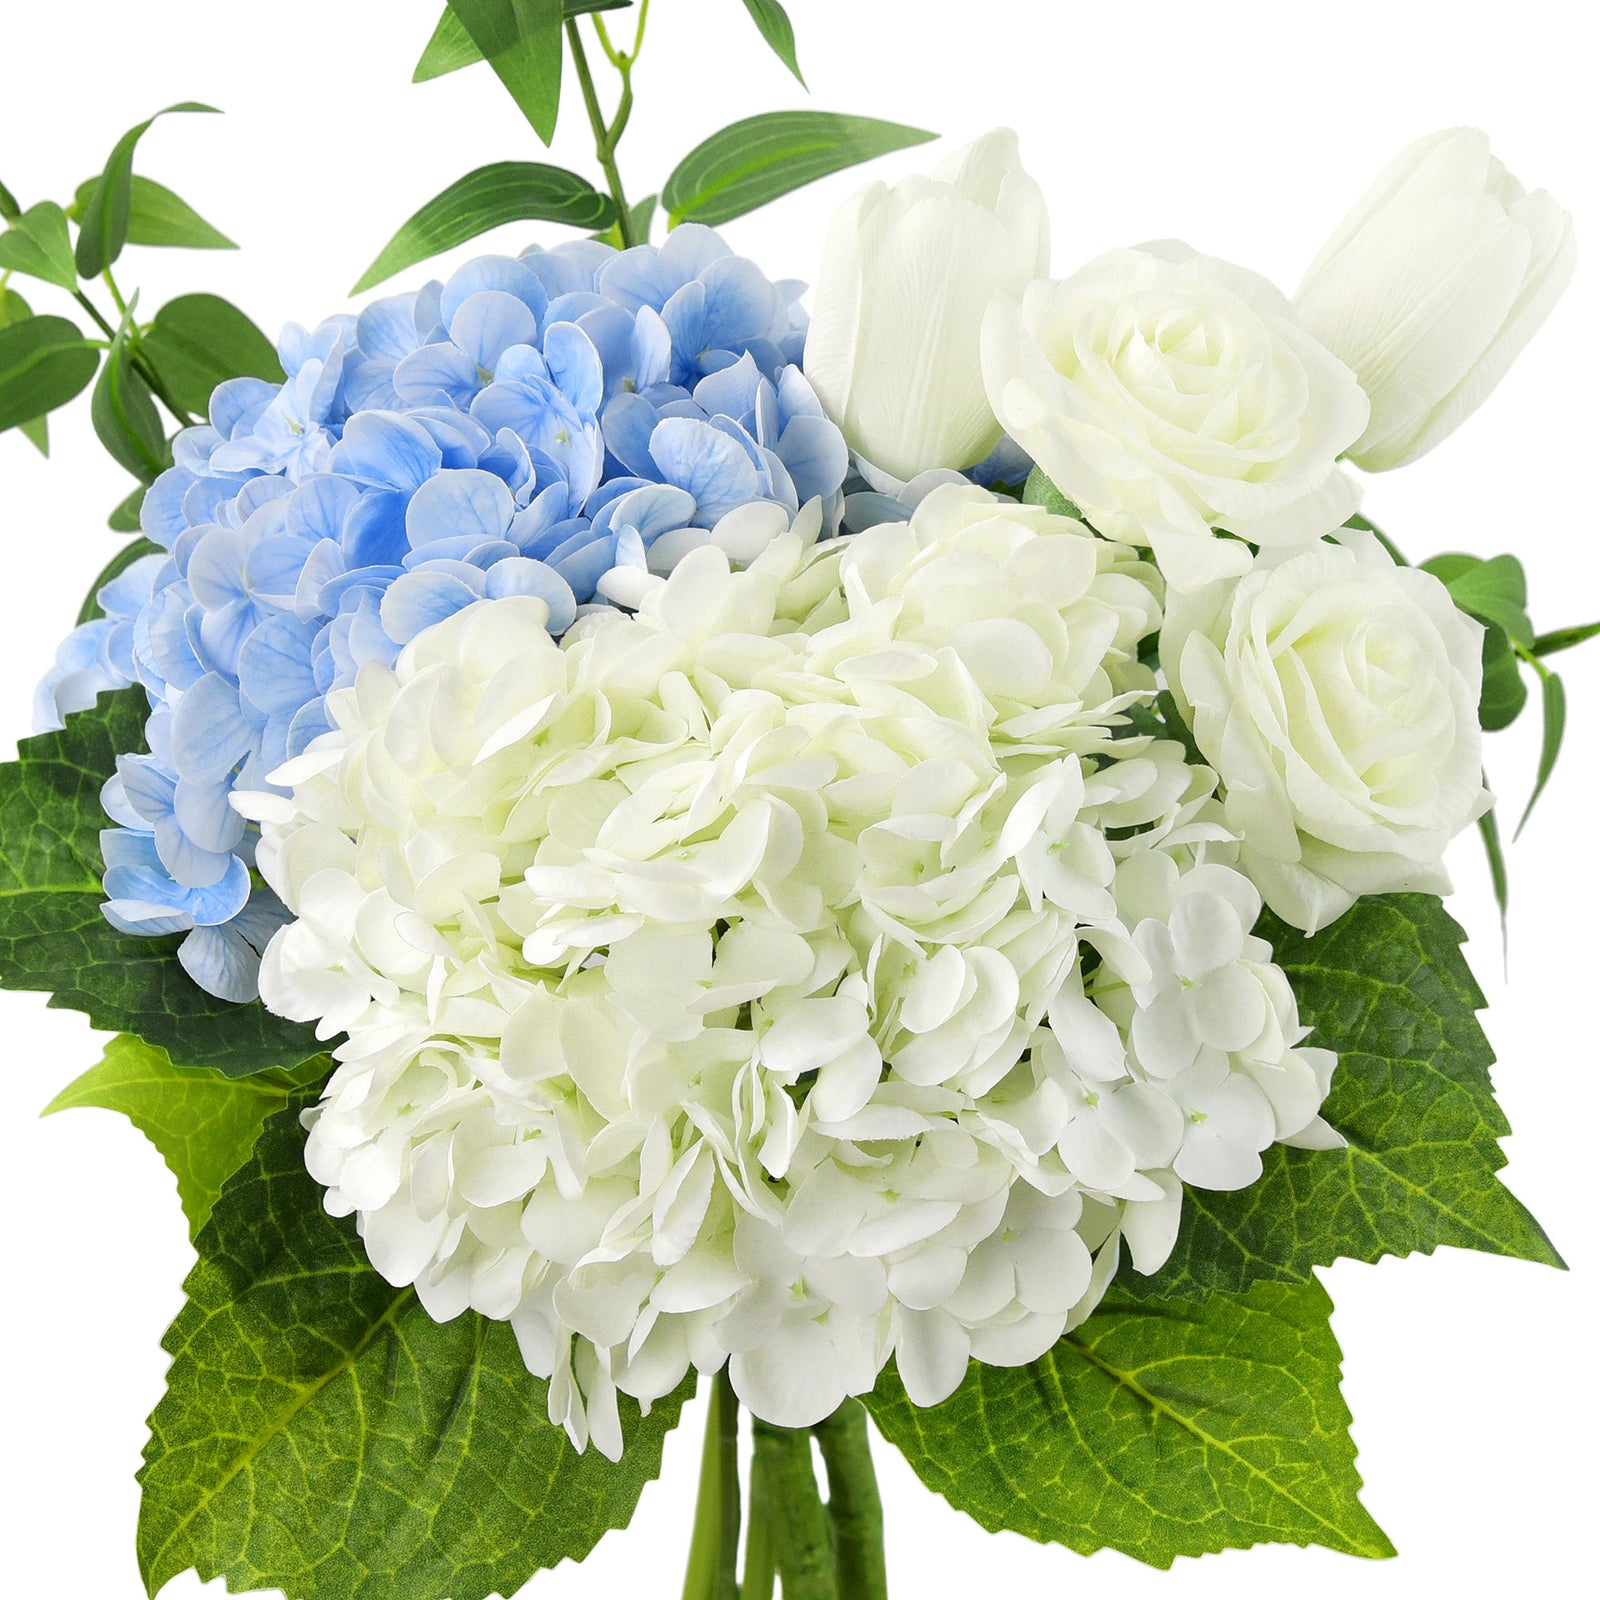 Hampton Bouquet Artificial Flowers for Corporate Gifting, Business Gifts, and Various Occasions 7 Stems